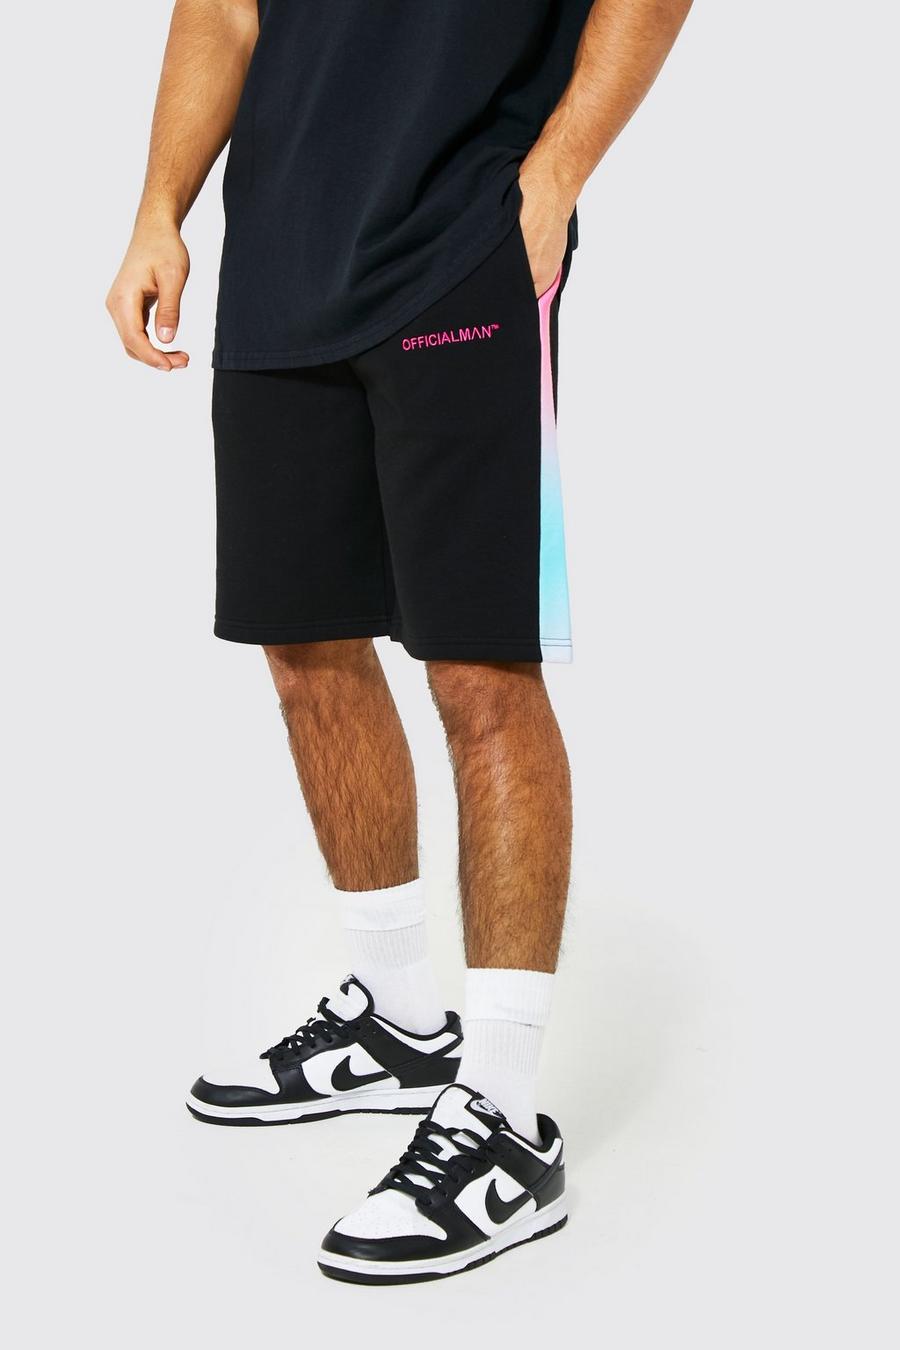 Black Oversized Official Man Ombre Panel Shorts image number 1